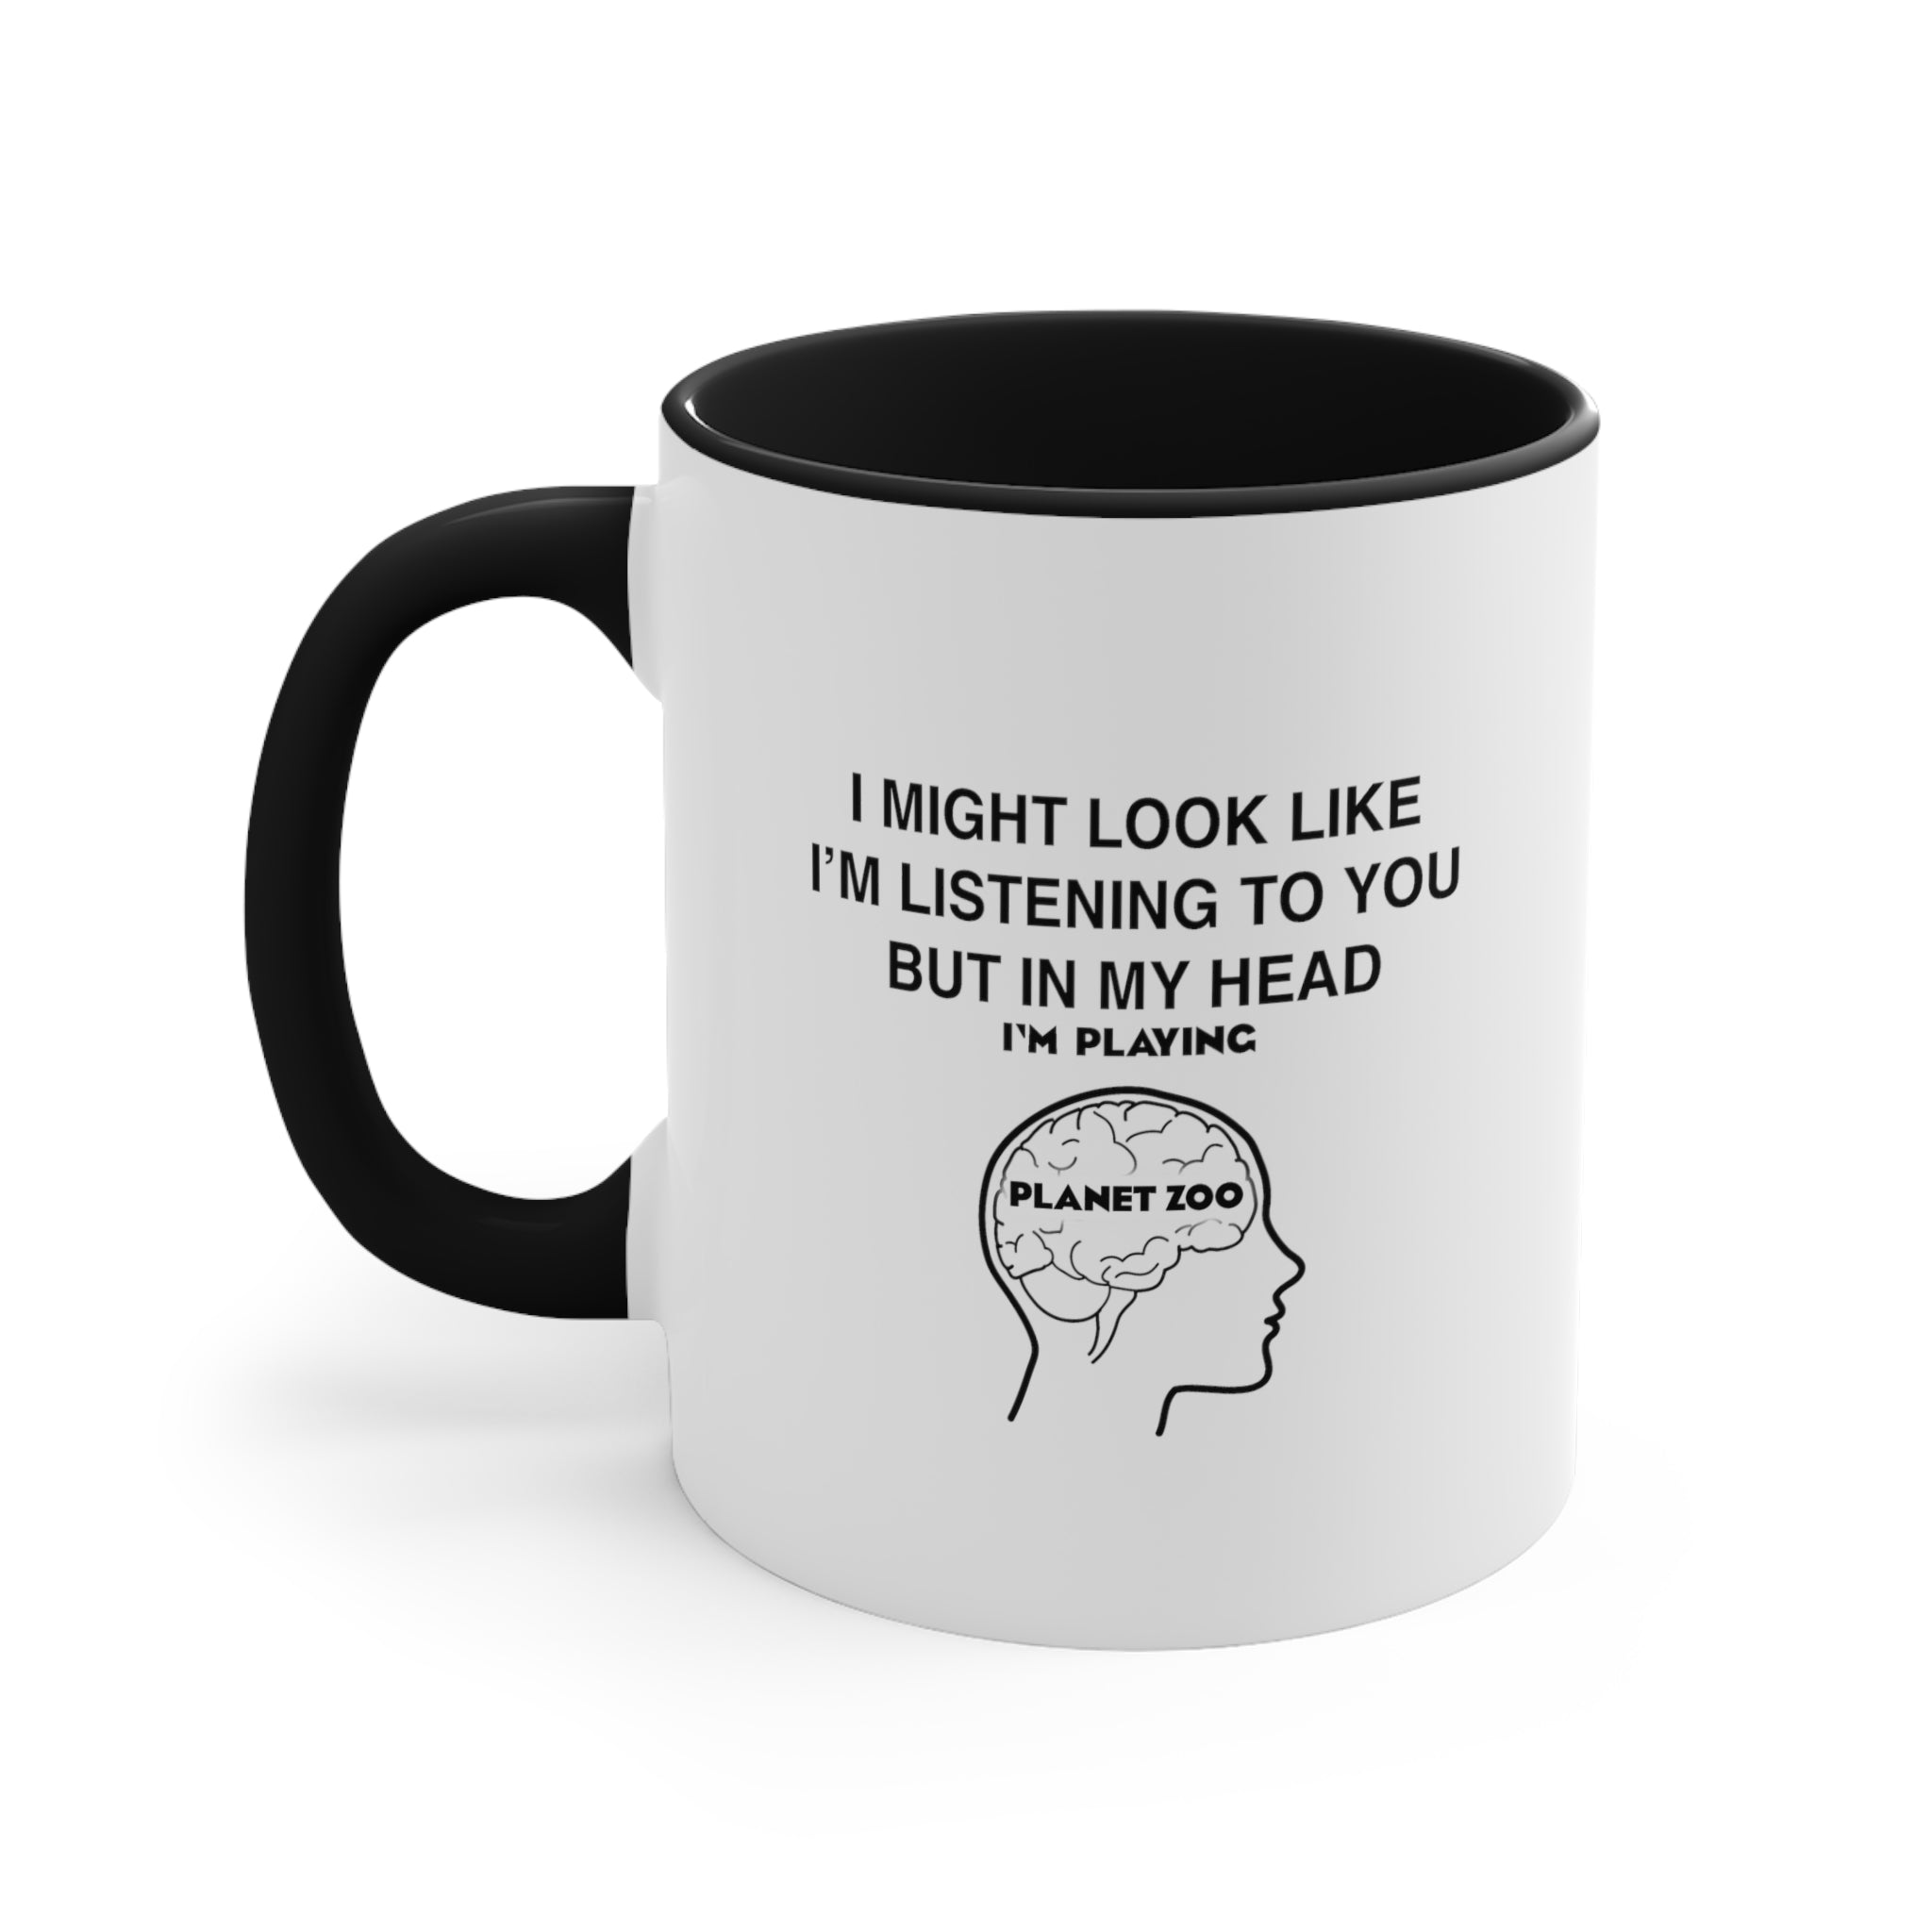 Planet Zoo Funny Coffee Mug, 11oz I Might Look Like I'm Listening To You Cups Mugs Cup Gamer Gift For Him Her Game Cup Cups Mugs Birthday Christmas Valentine's Anniversary Gifts